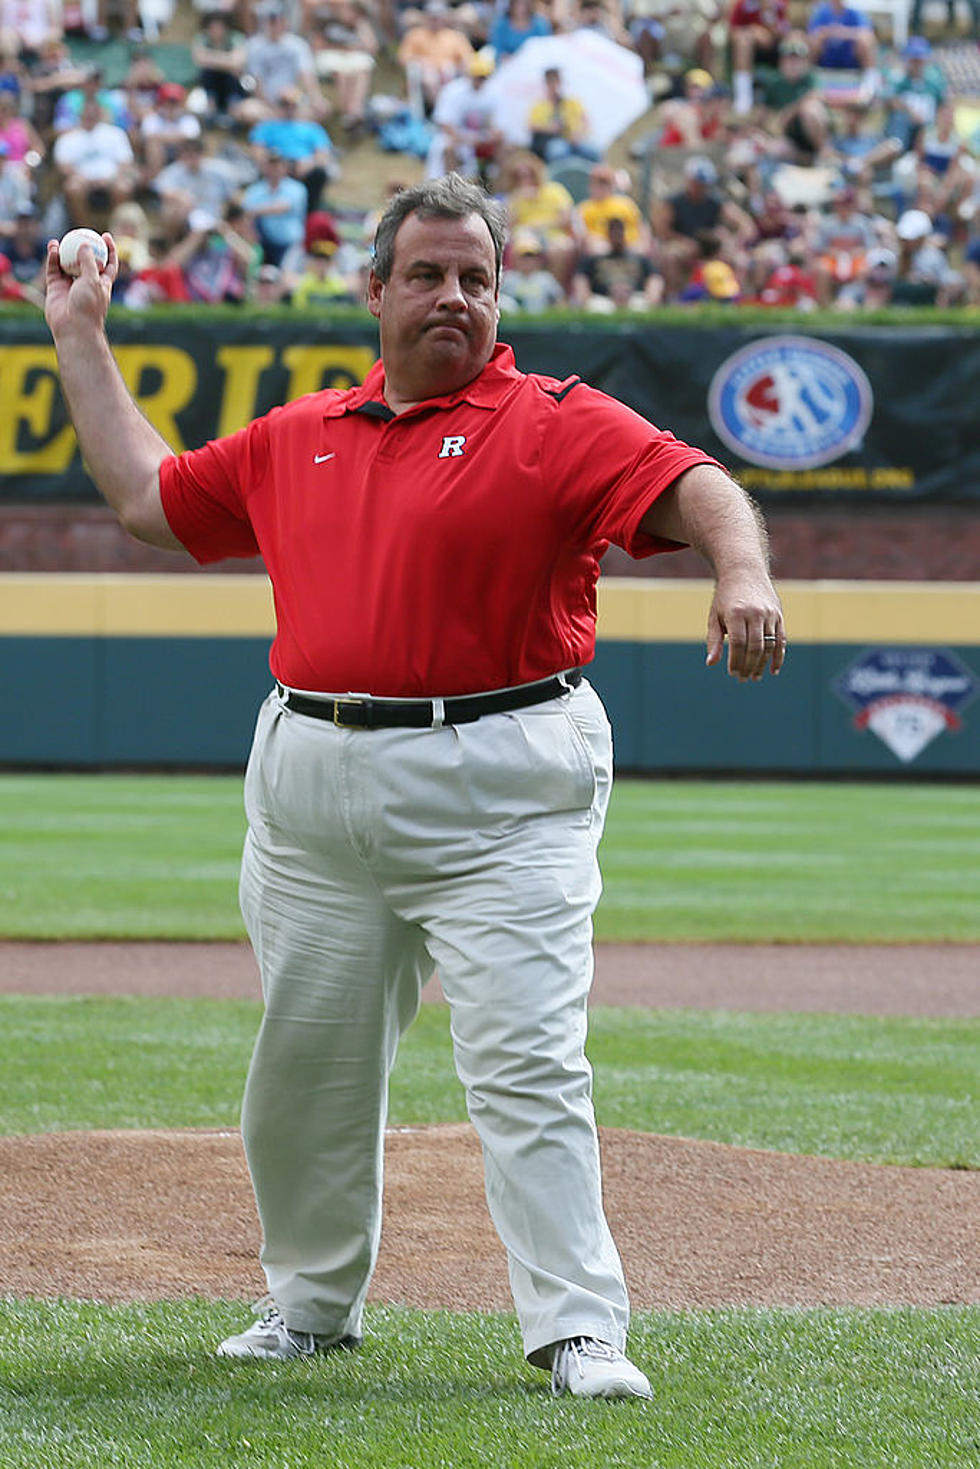 After Christie rips Phillies, team fires back on Twitter